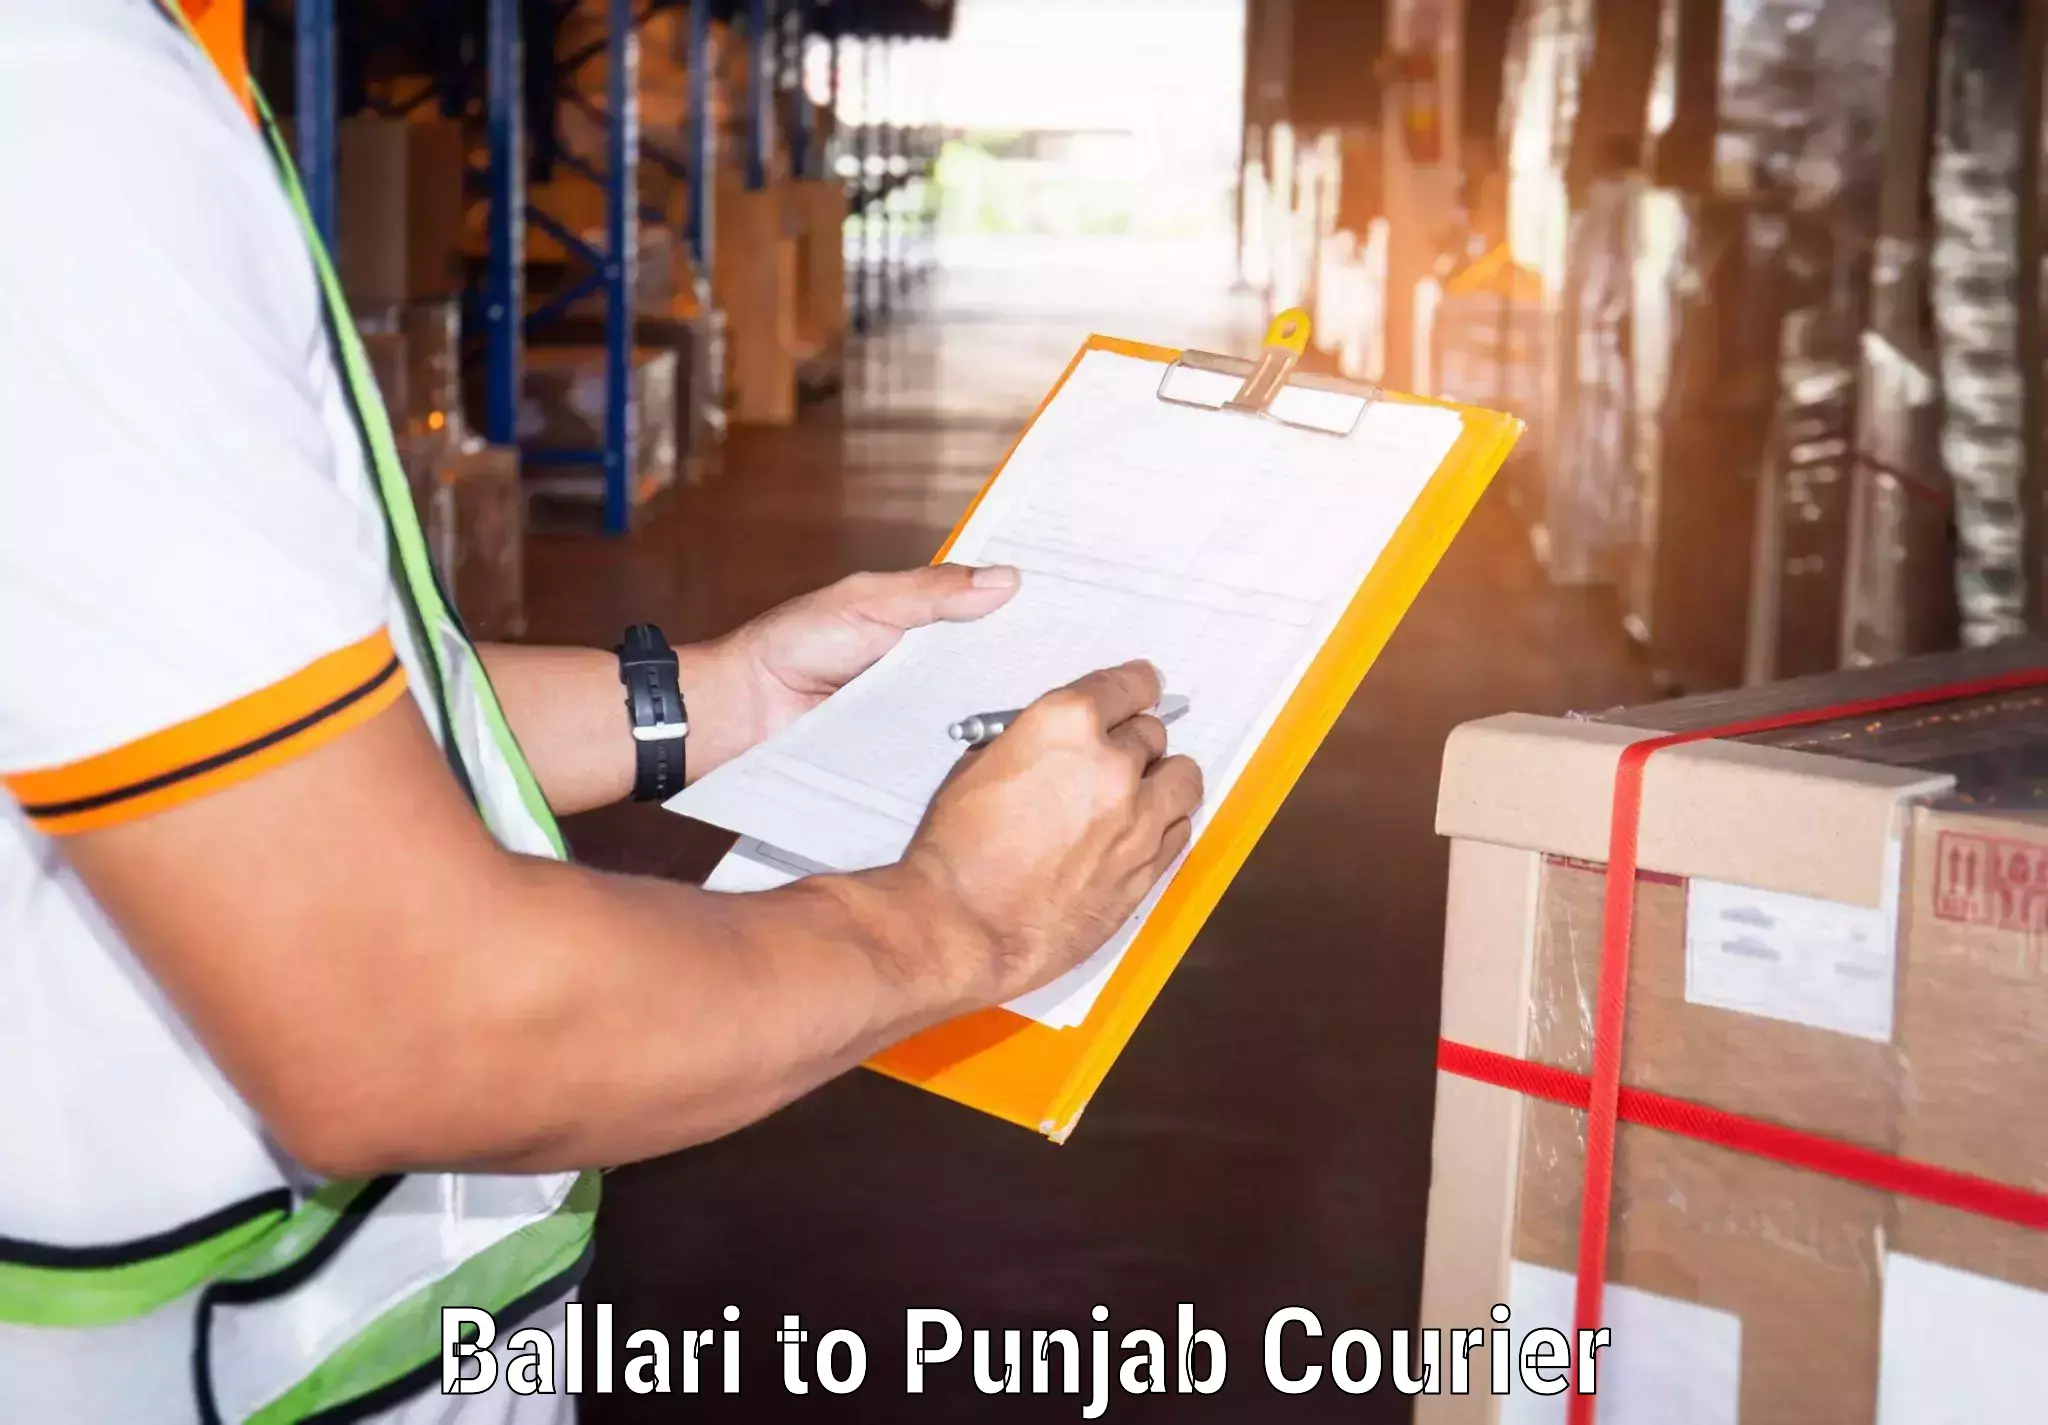 State-of-the-art courier technology Ballari to Punjab